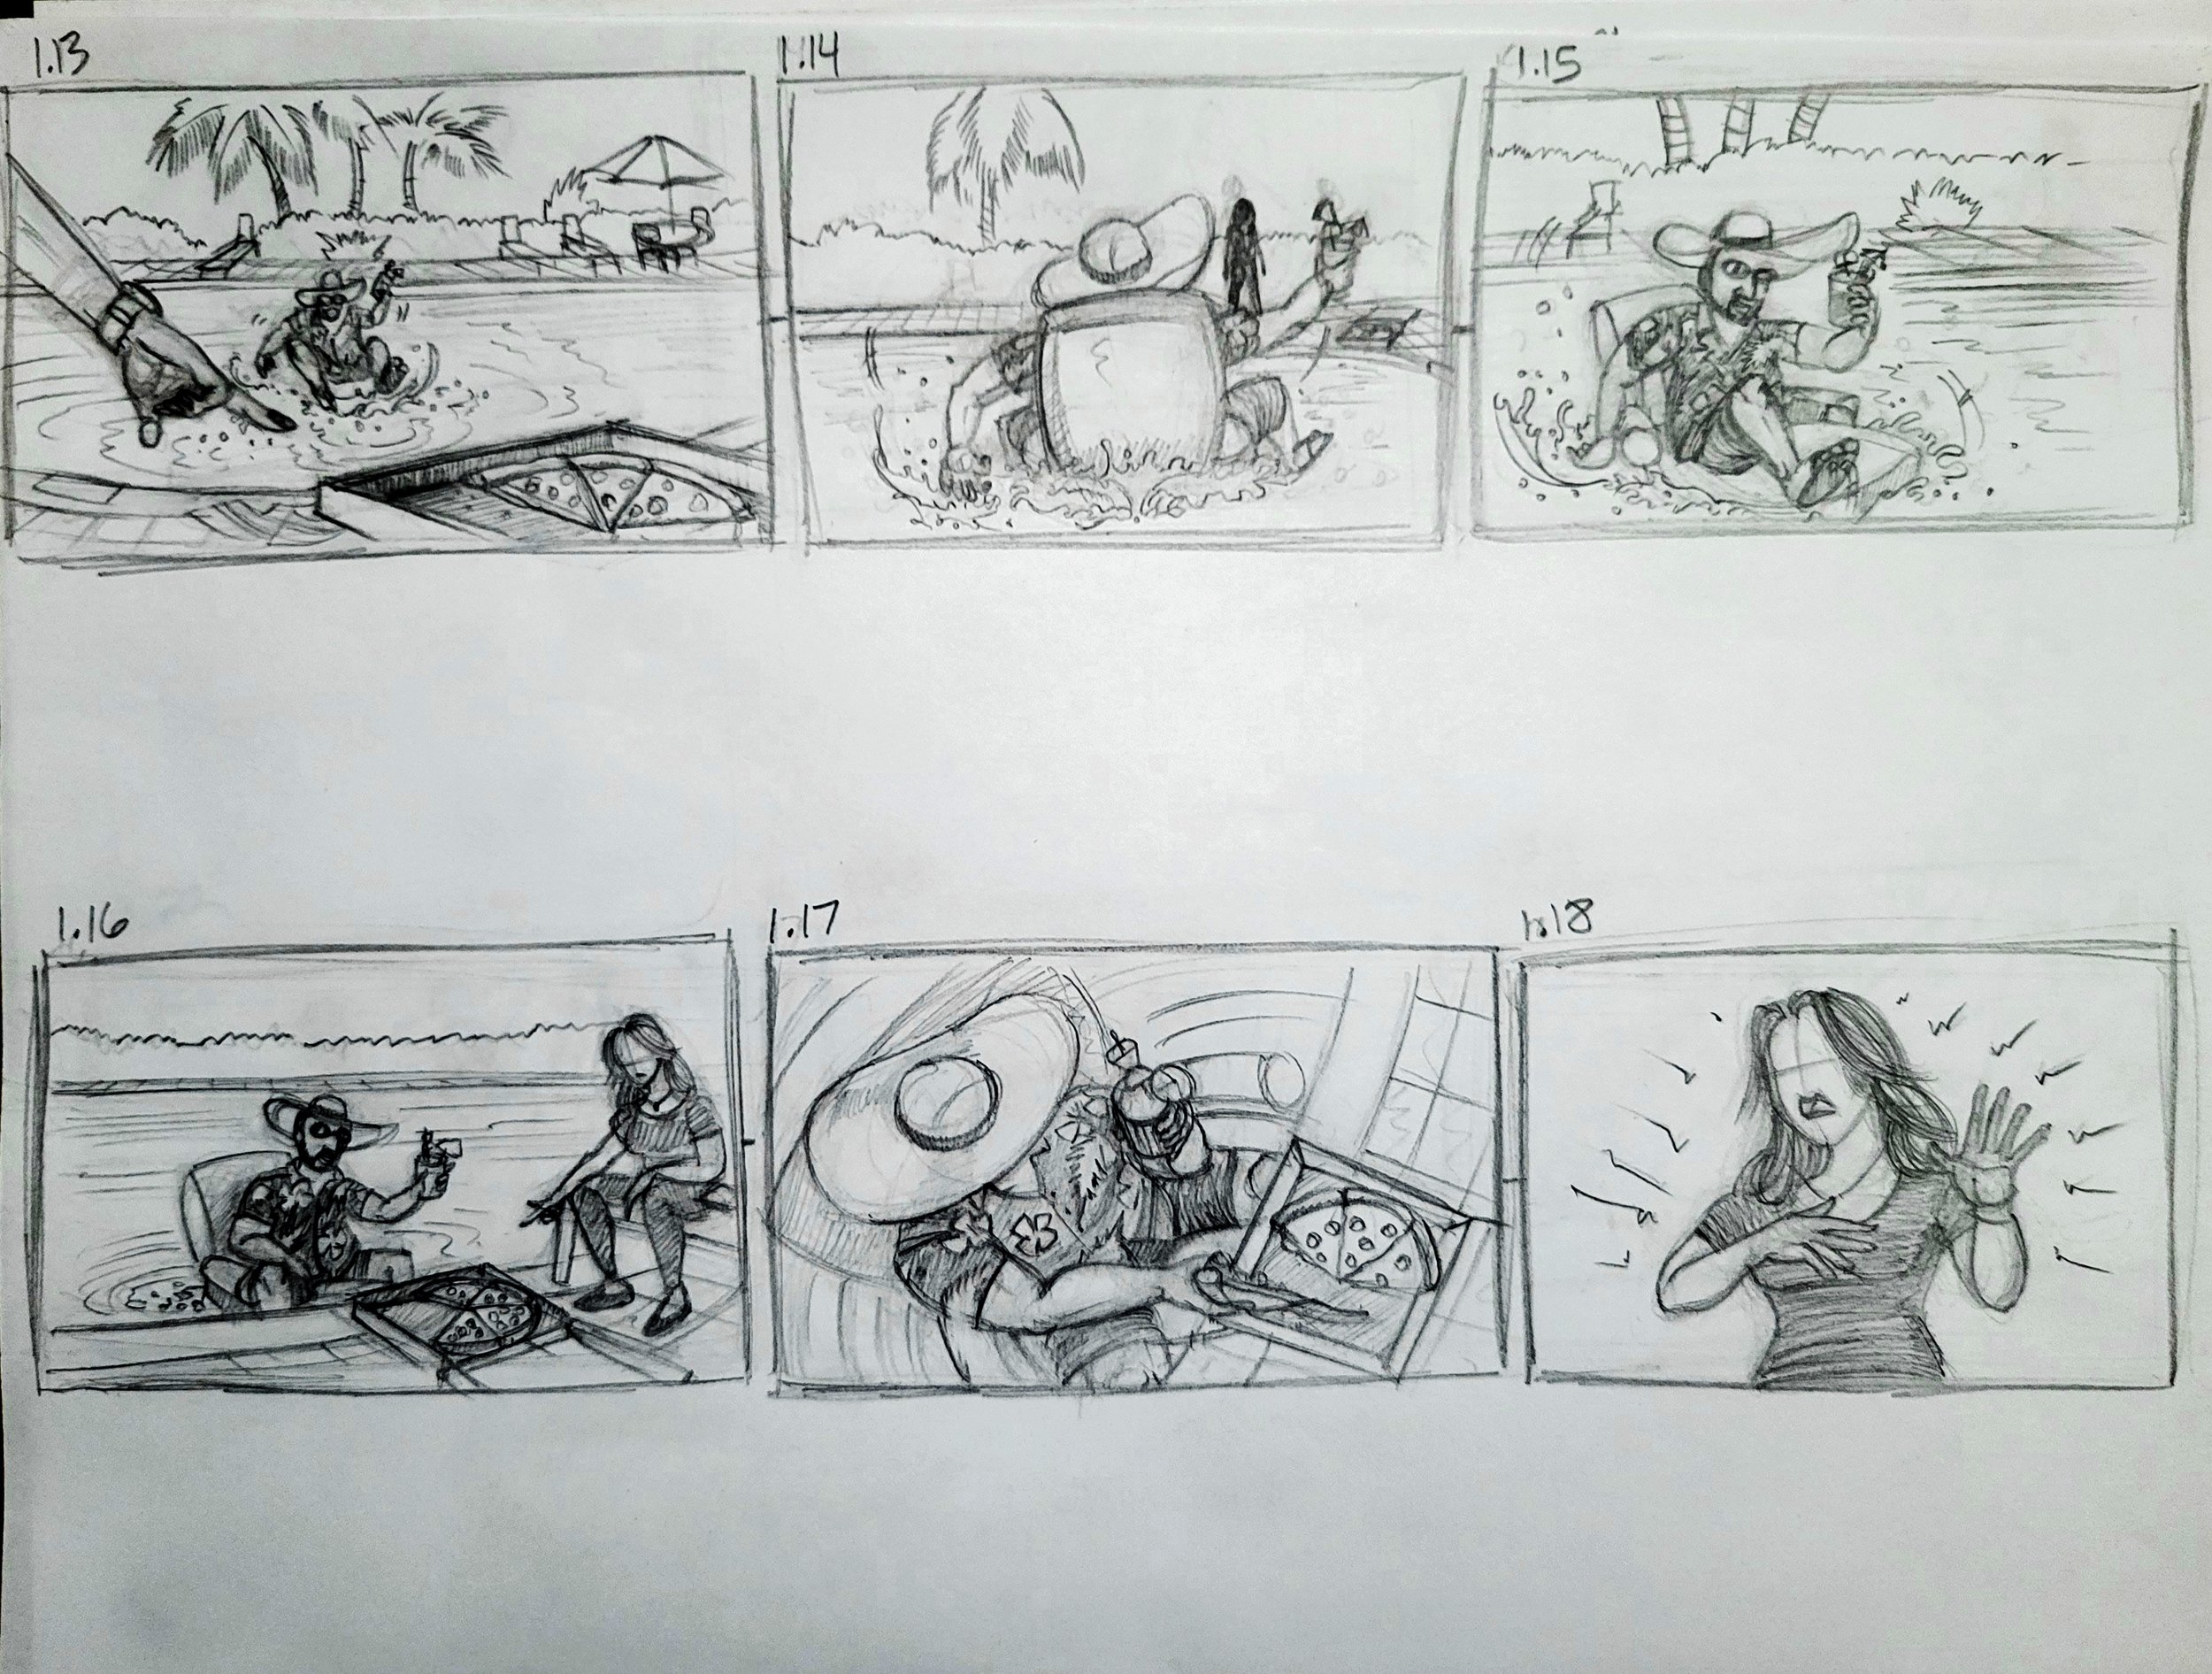 WR_Real_Suite_Eats_S1_E2_StoryBoard_Frames_1_13_to_1_18.jpg